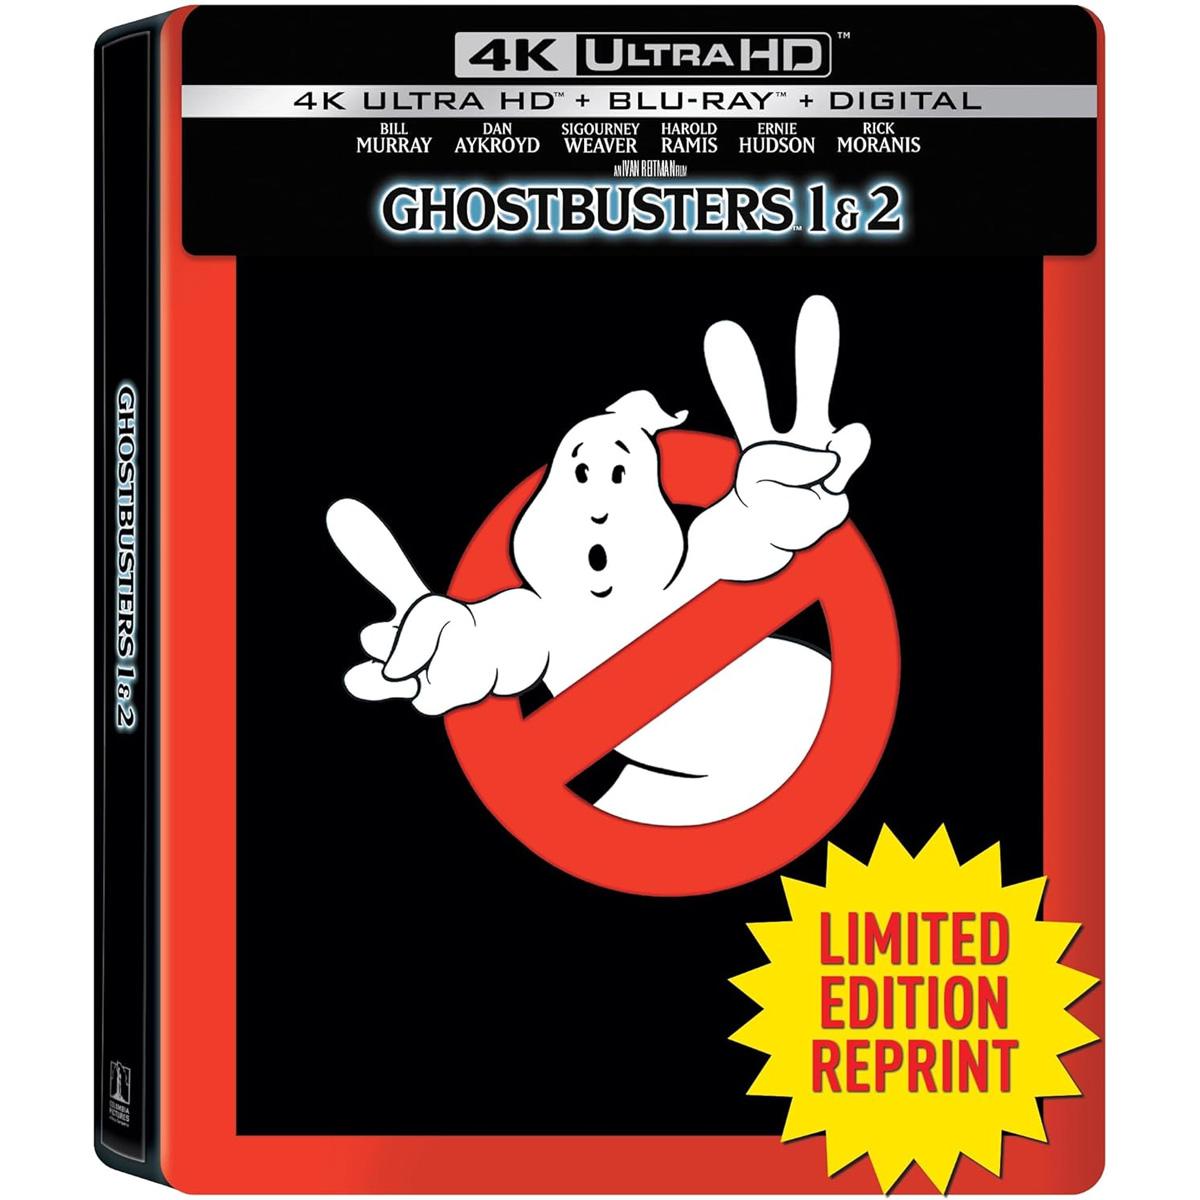 Ghostbusters and Ghostbusters II 4K Ultra HD for $36.29